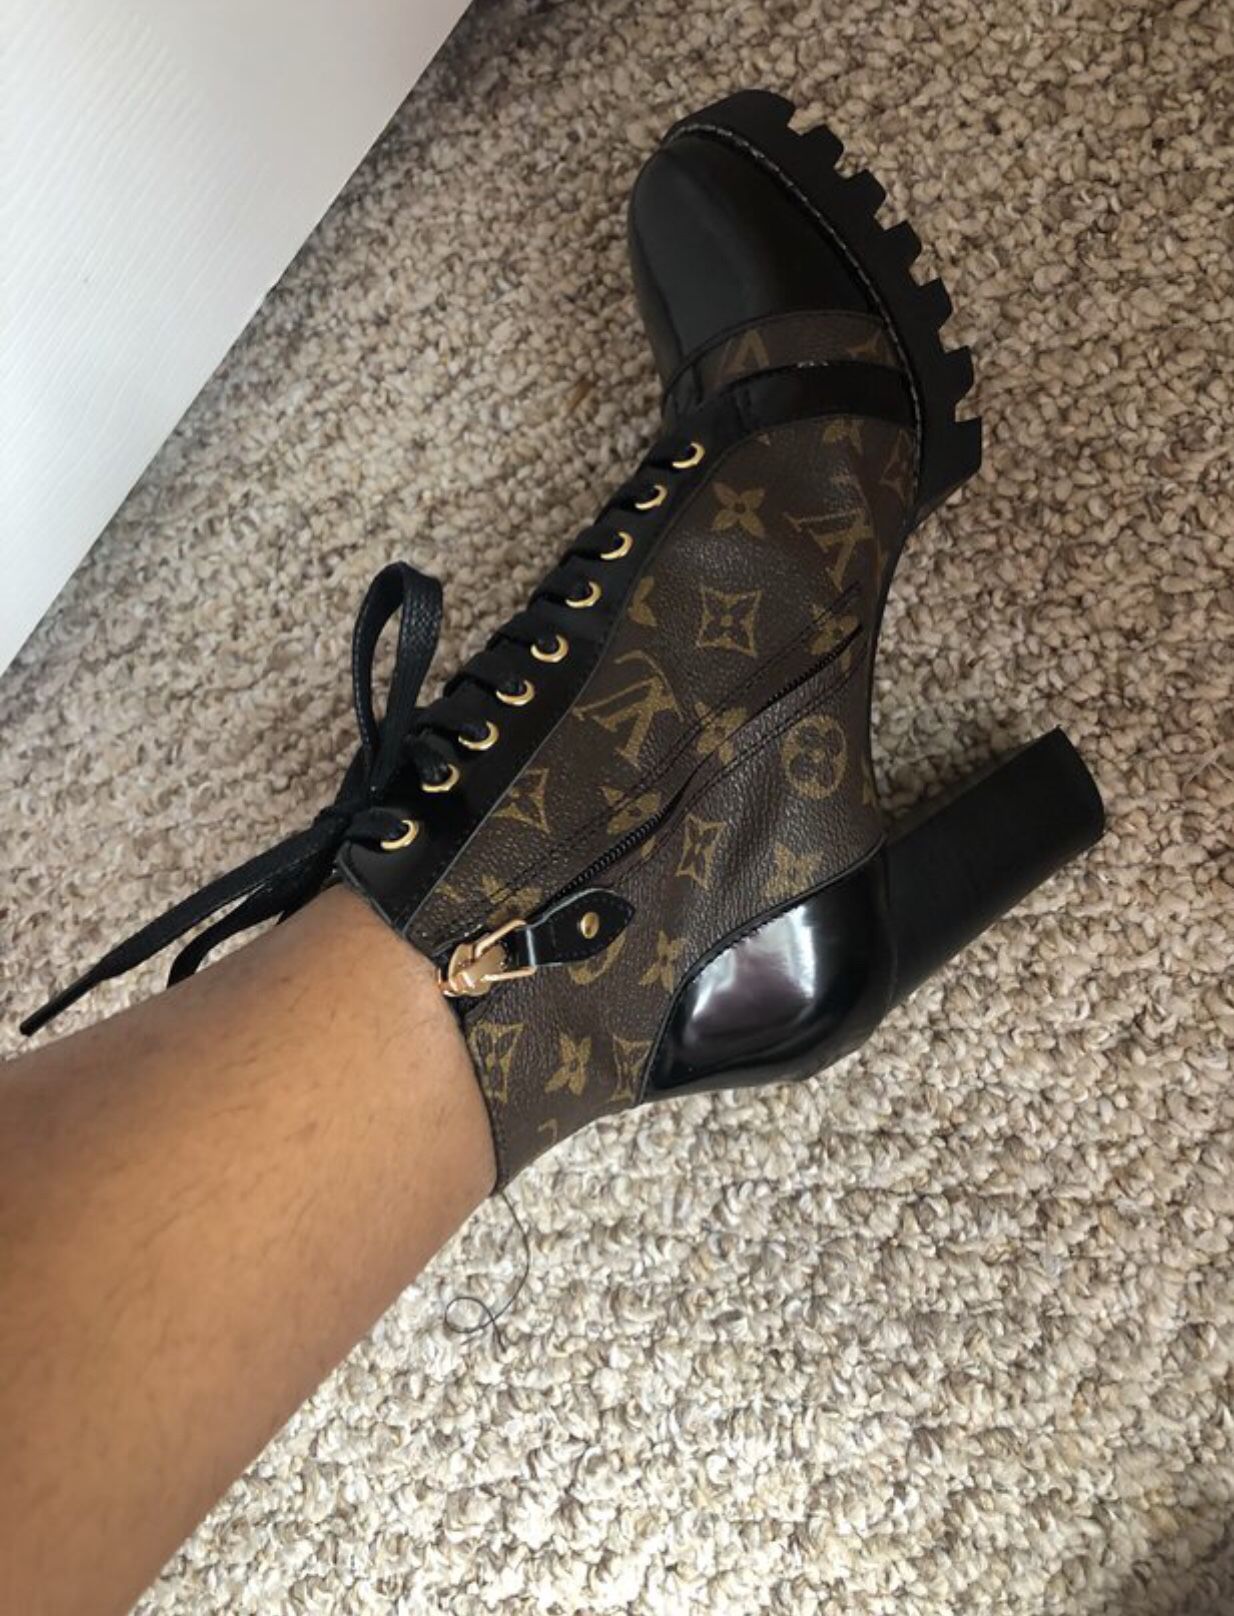 LV Louis Vuitton High heel boots for Sale in Baltimore, MD